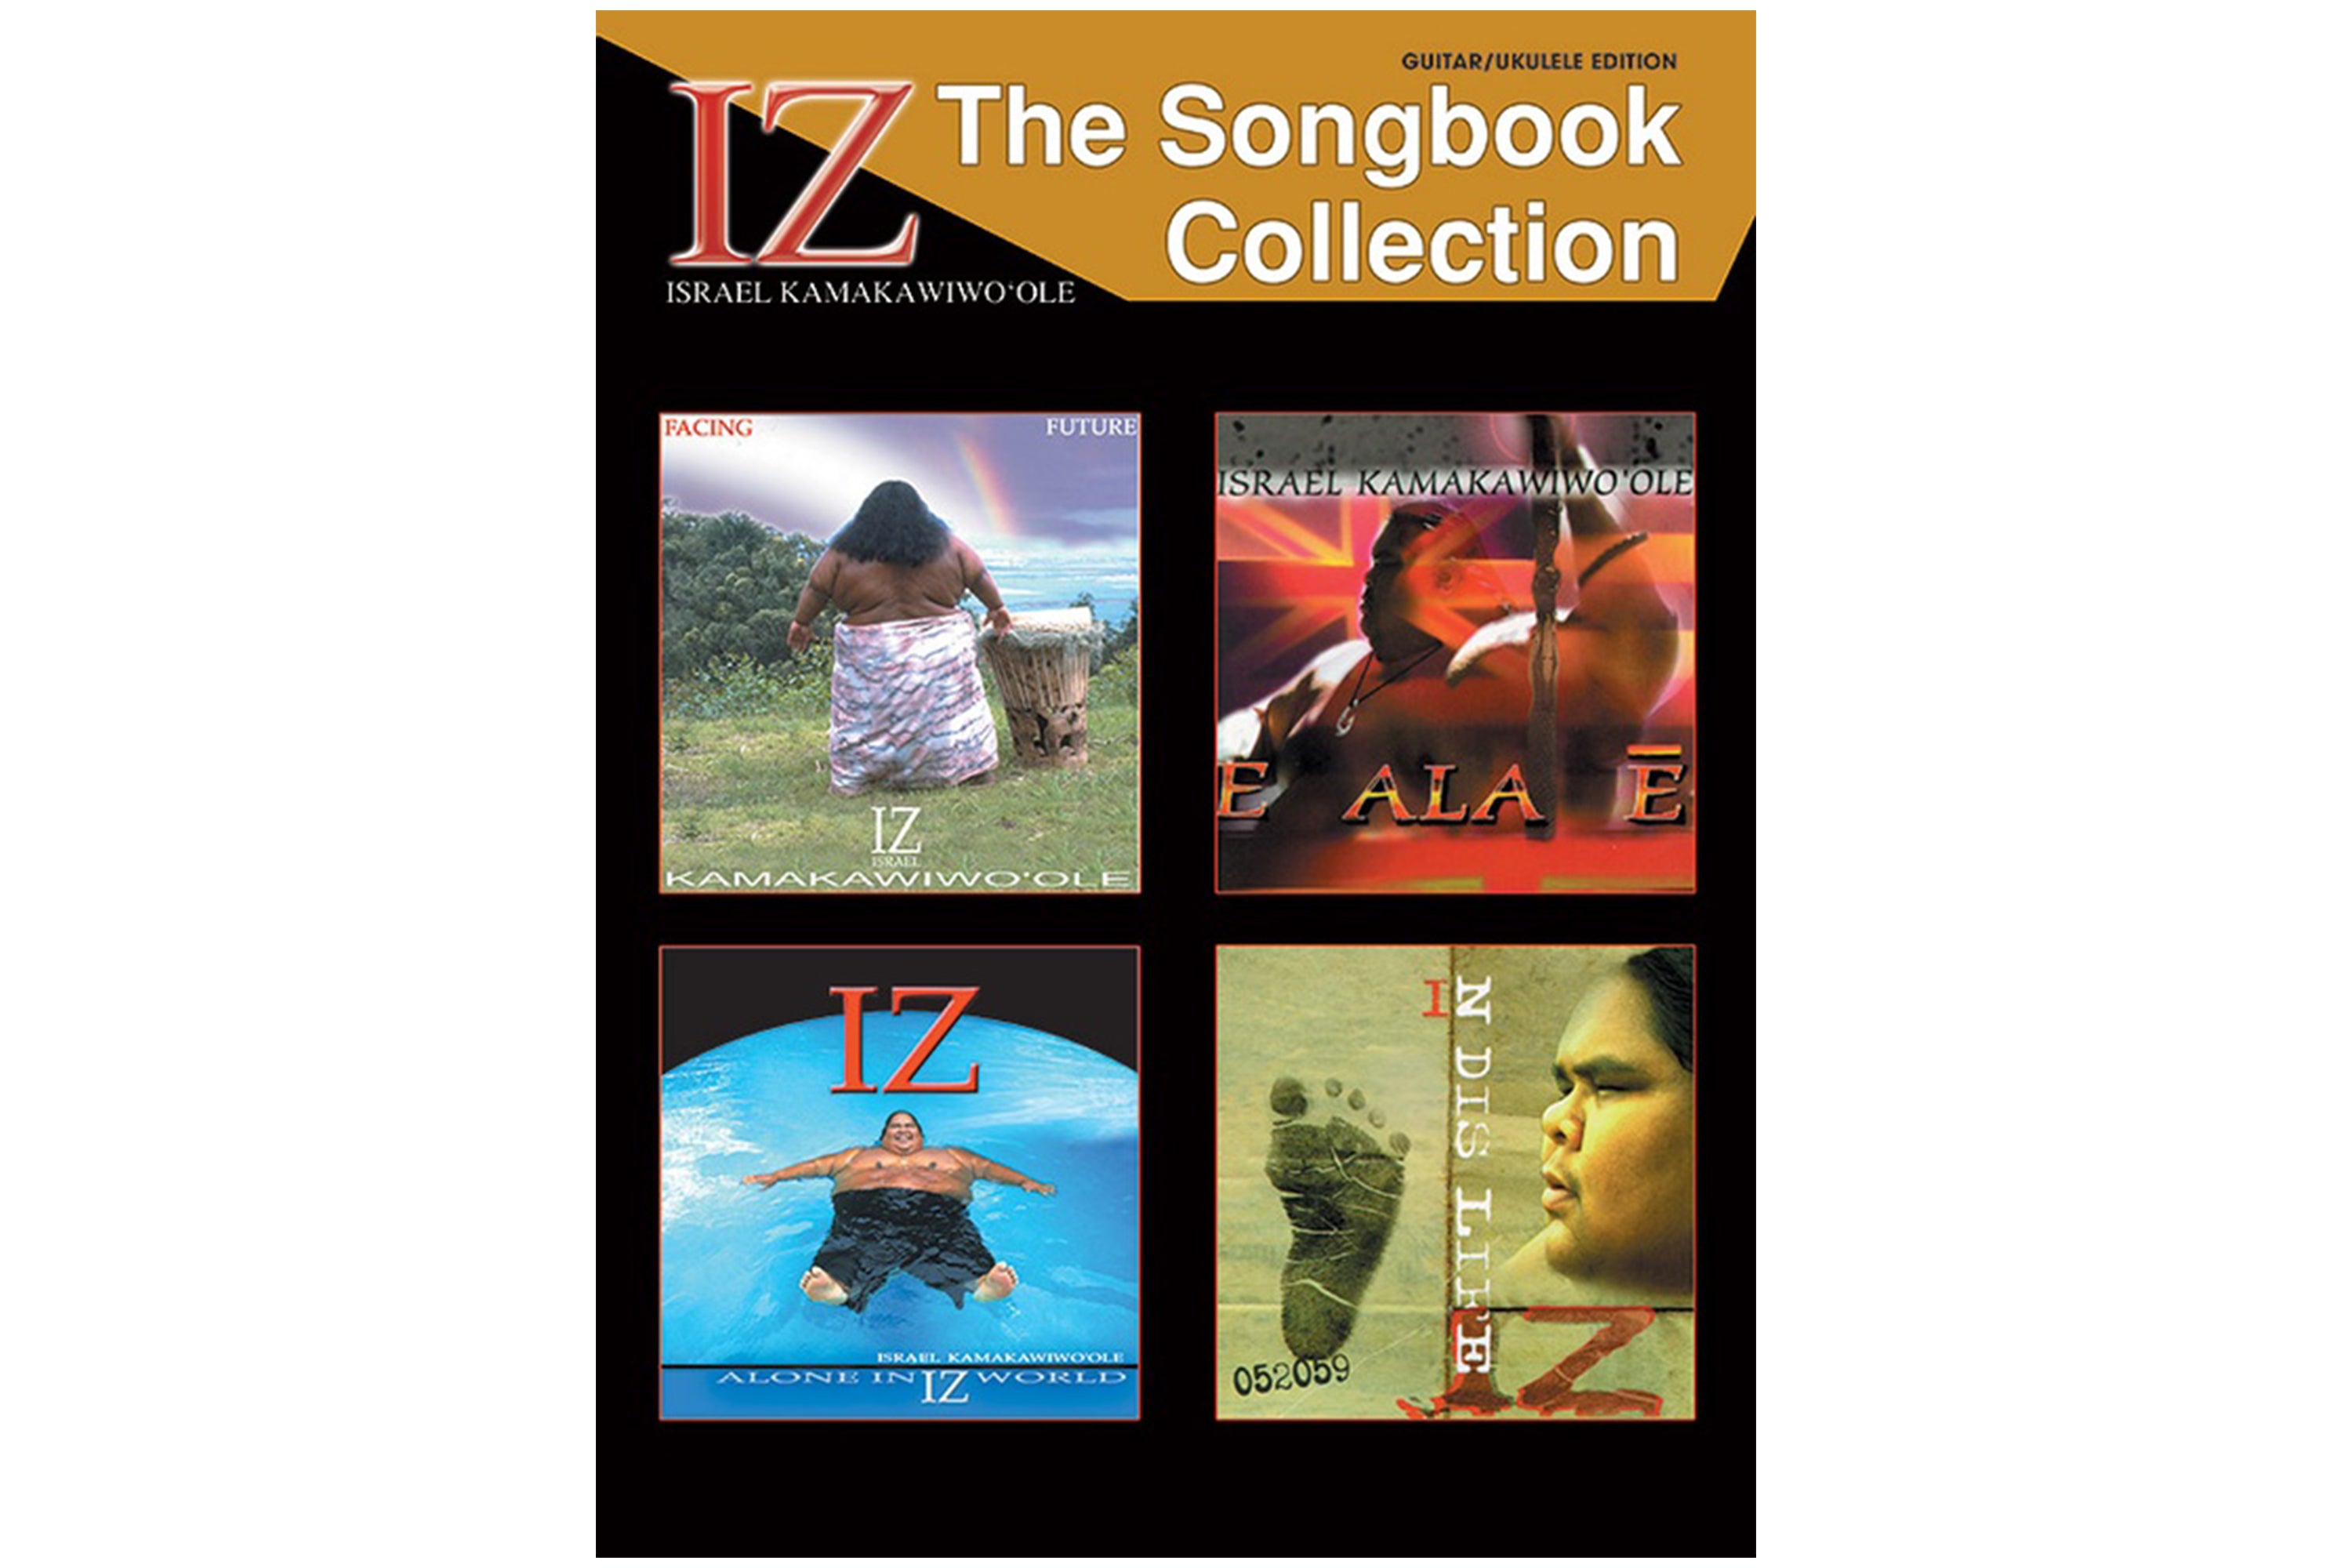 Alfred Iz: The Songbook Collection - Guitar/Ukulele Edition